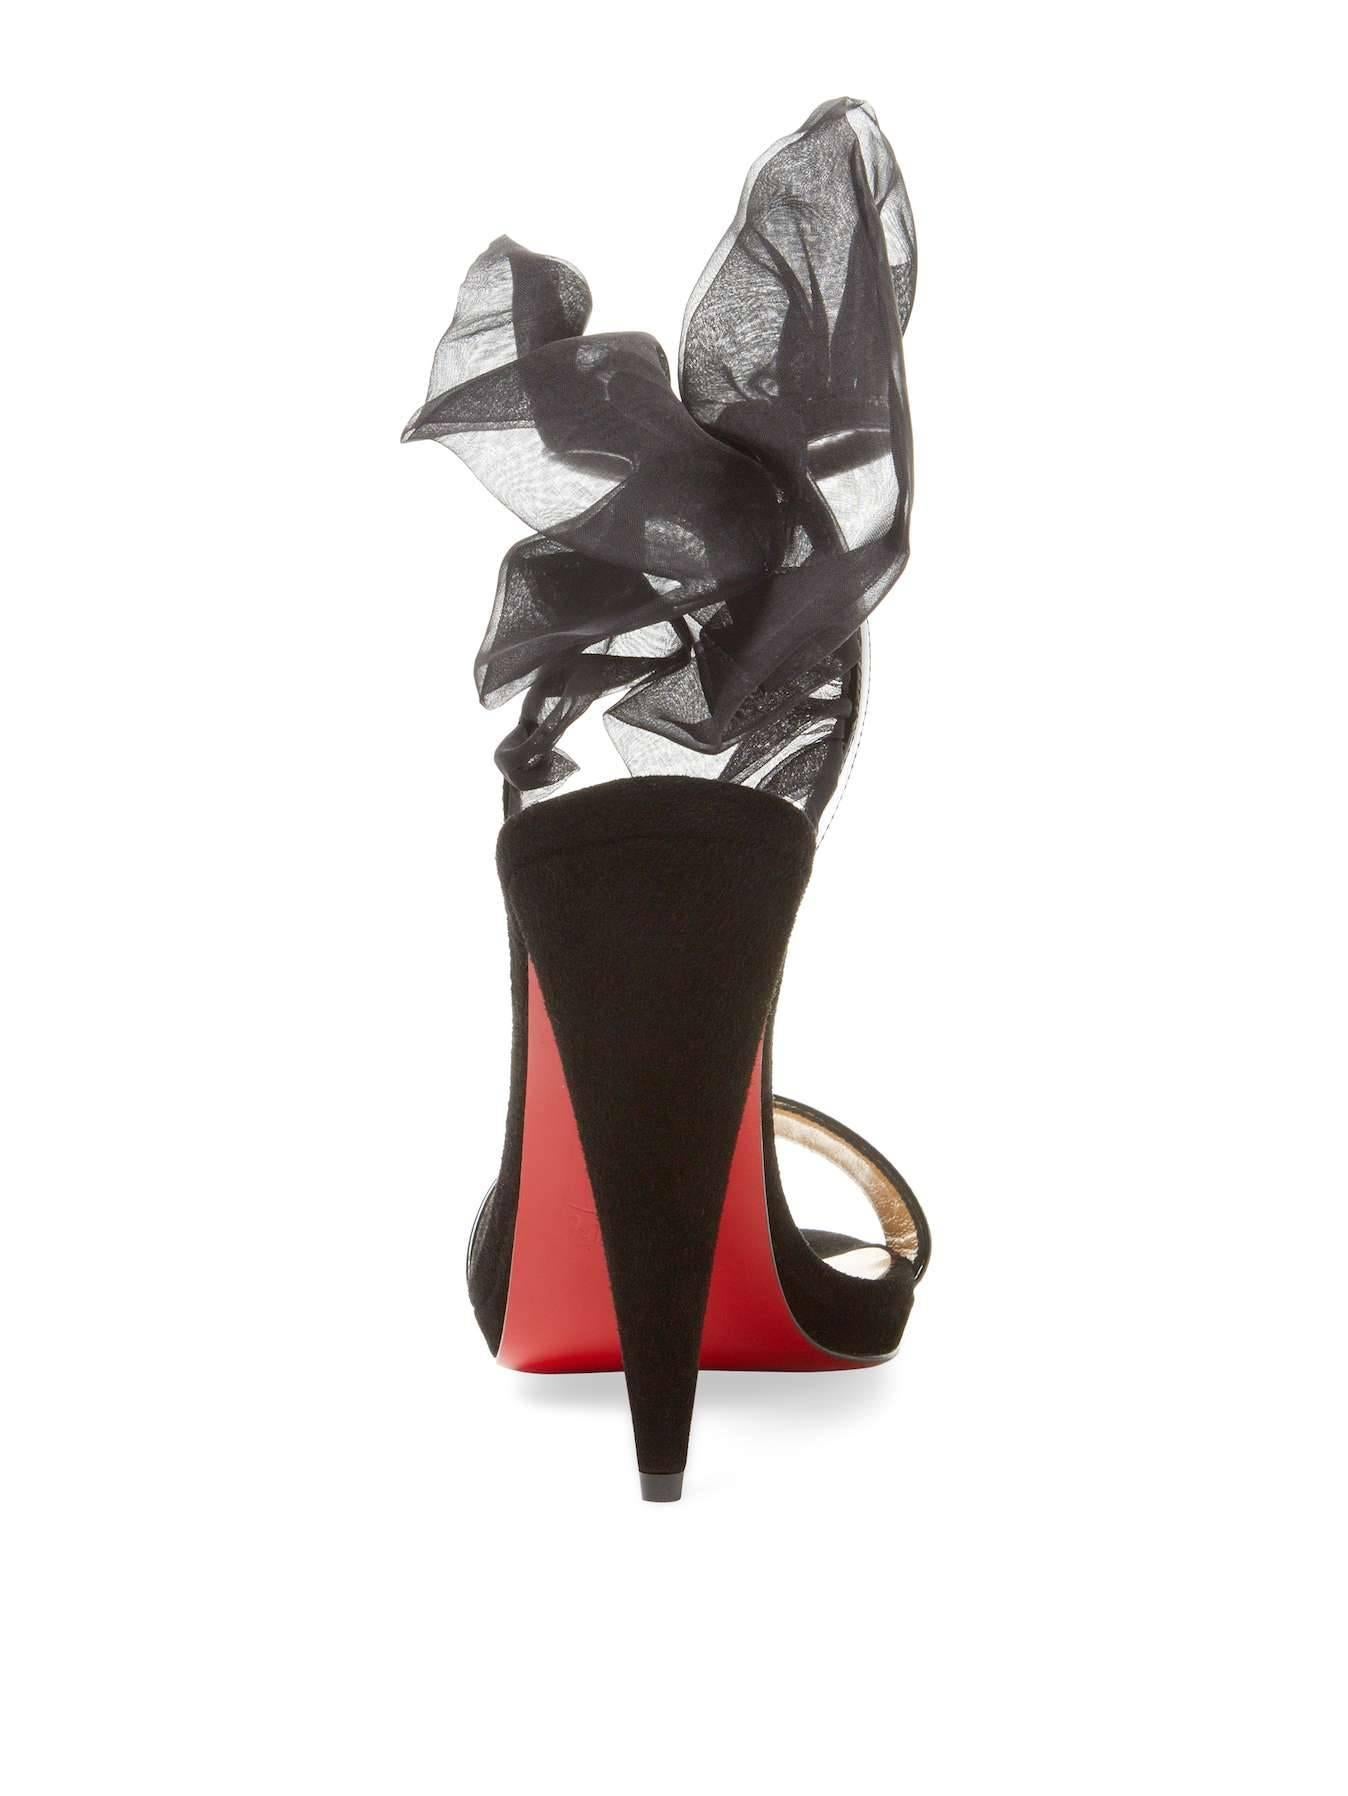 Christian Louboutin New Sold Out Black Patent Evening Sandals Heels in Box 2